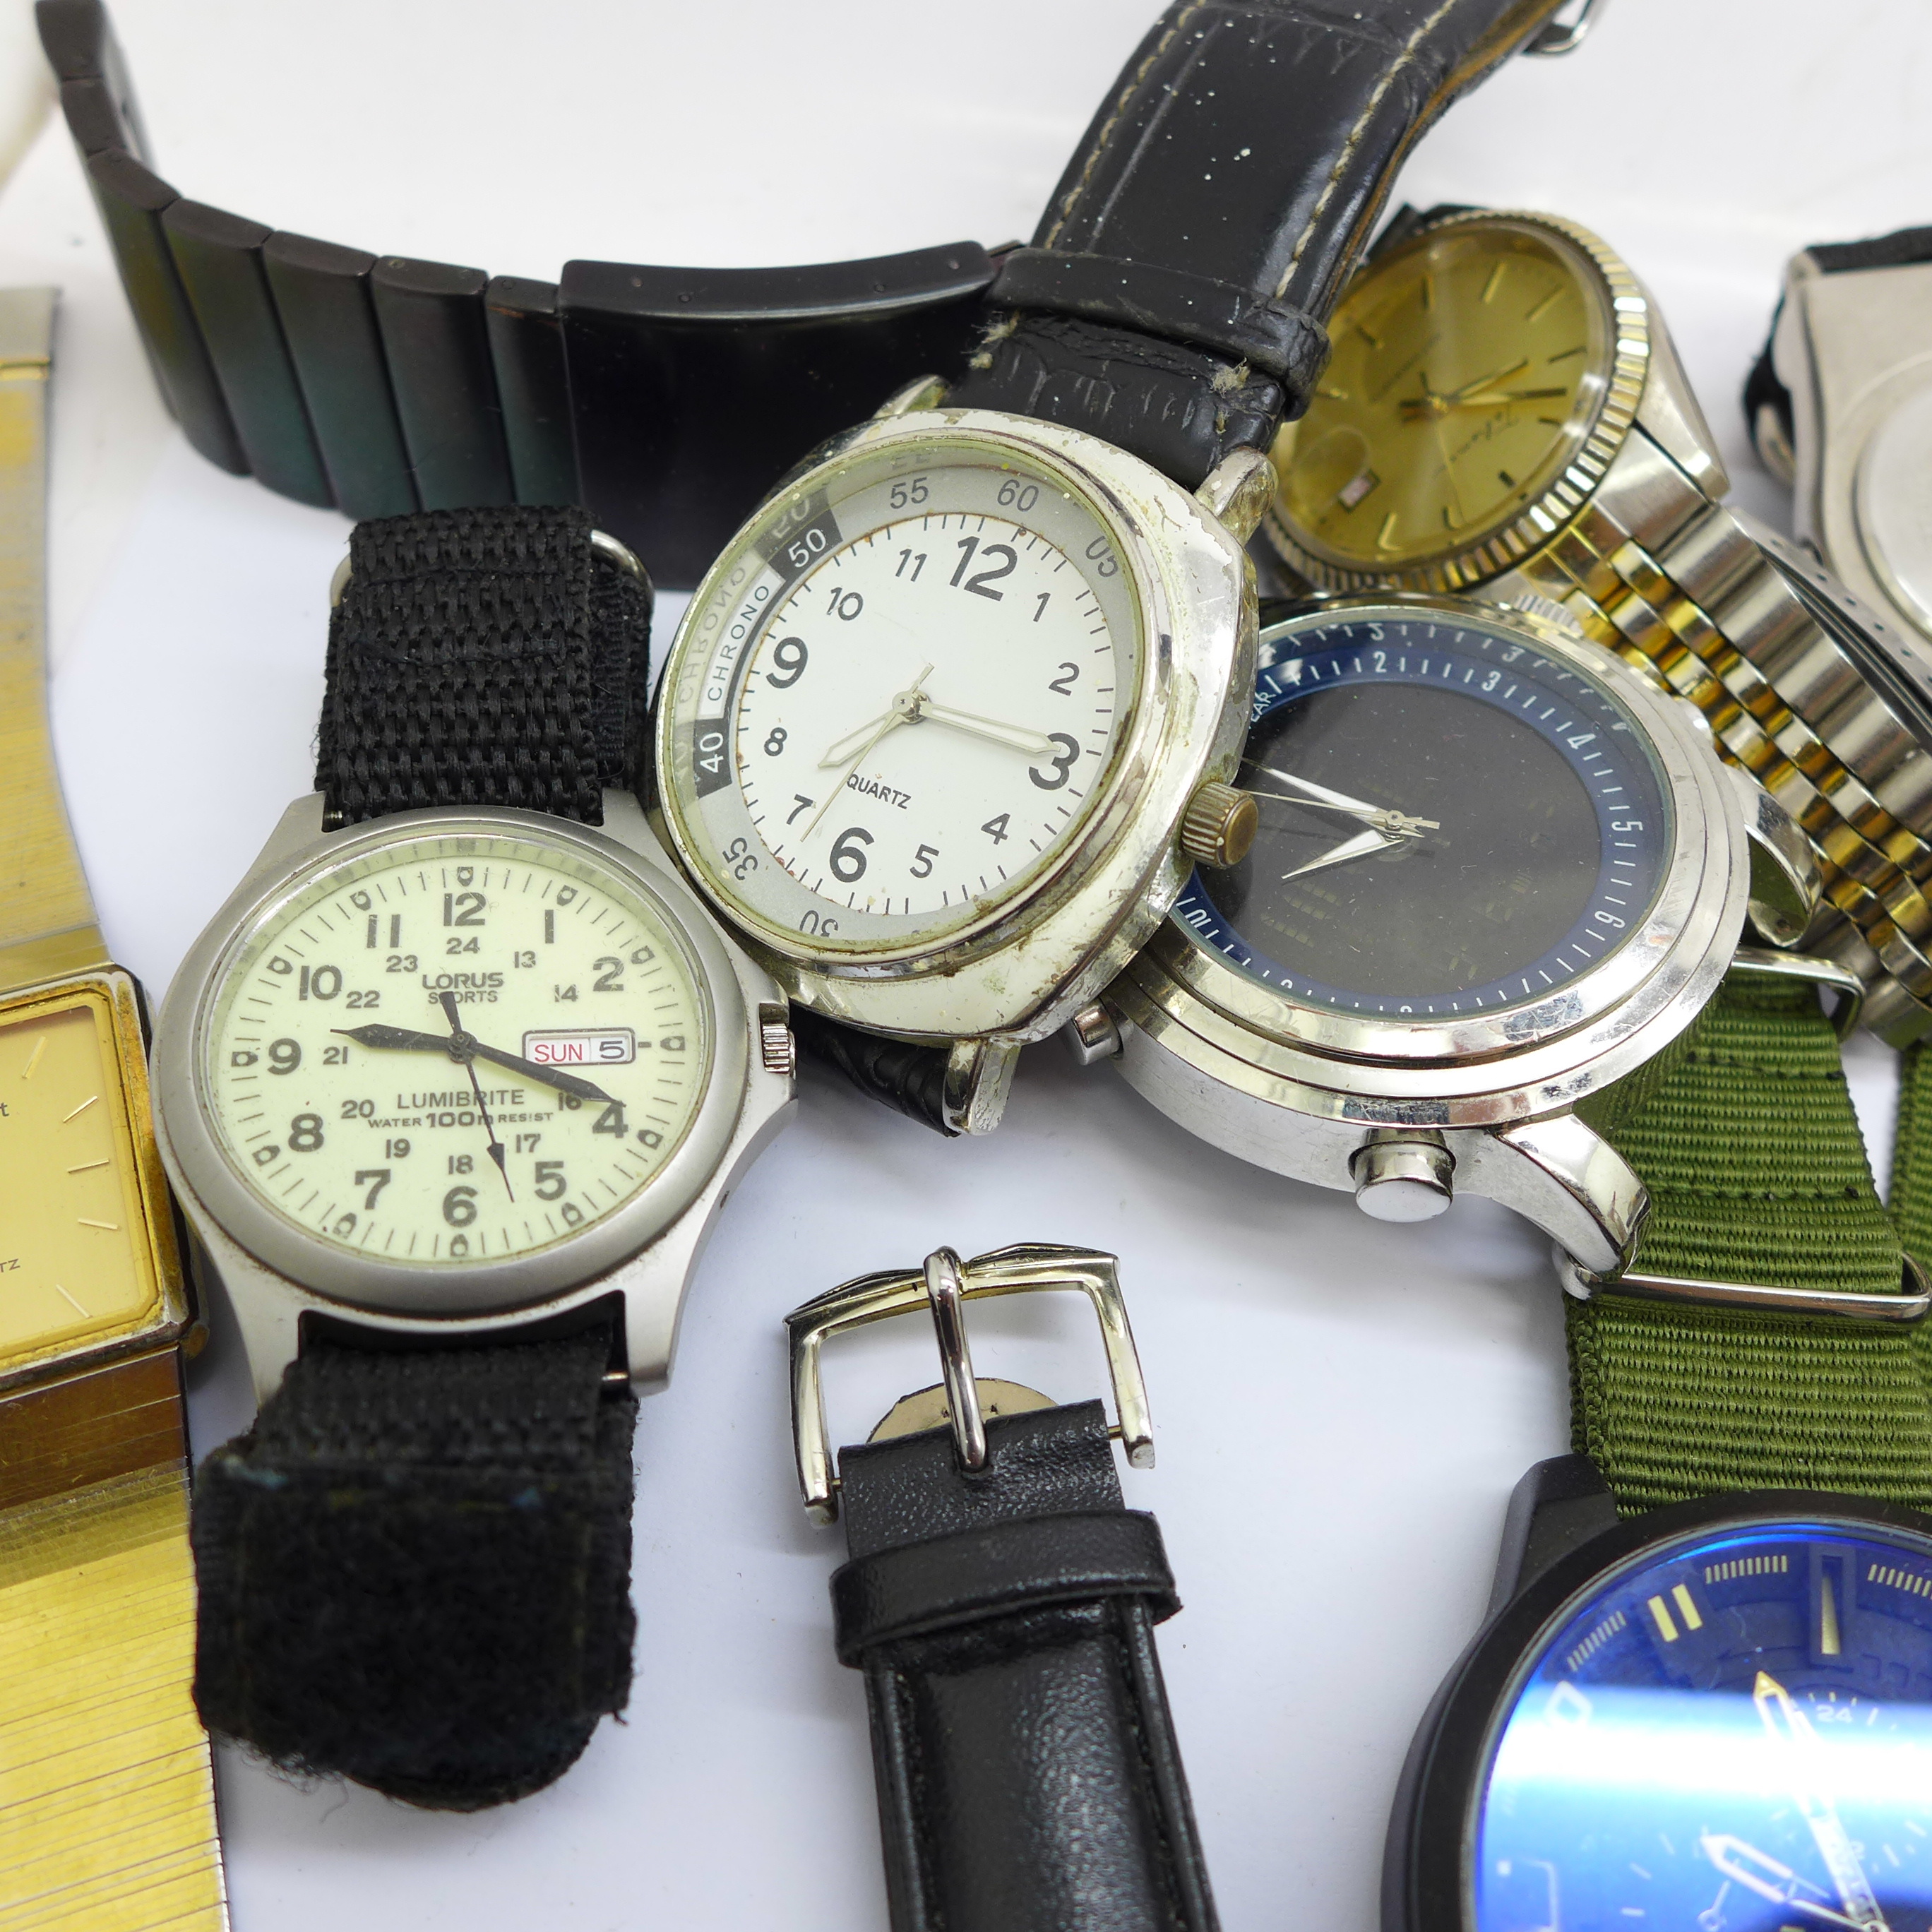 Wristwatches including Seiko and Accurist, watch glasses, etc. - Image 5 of 8